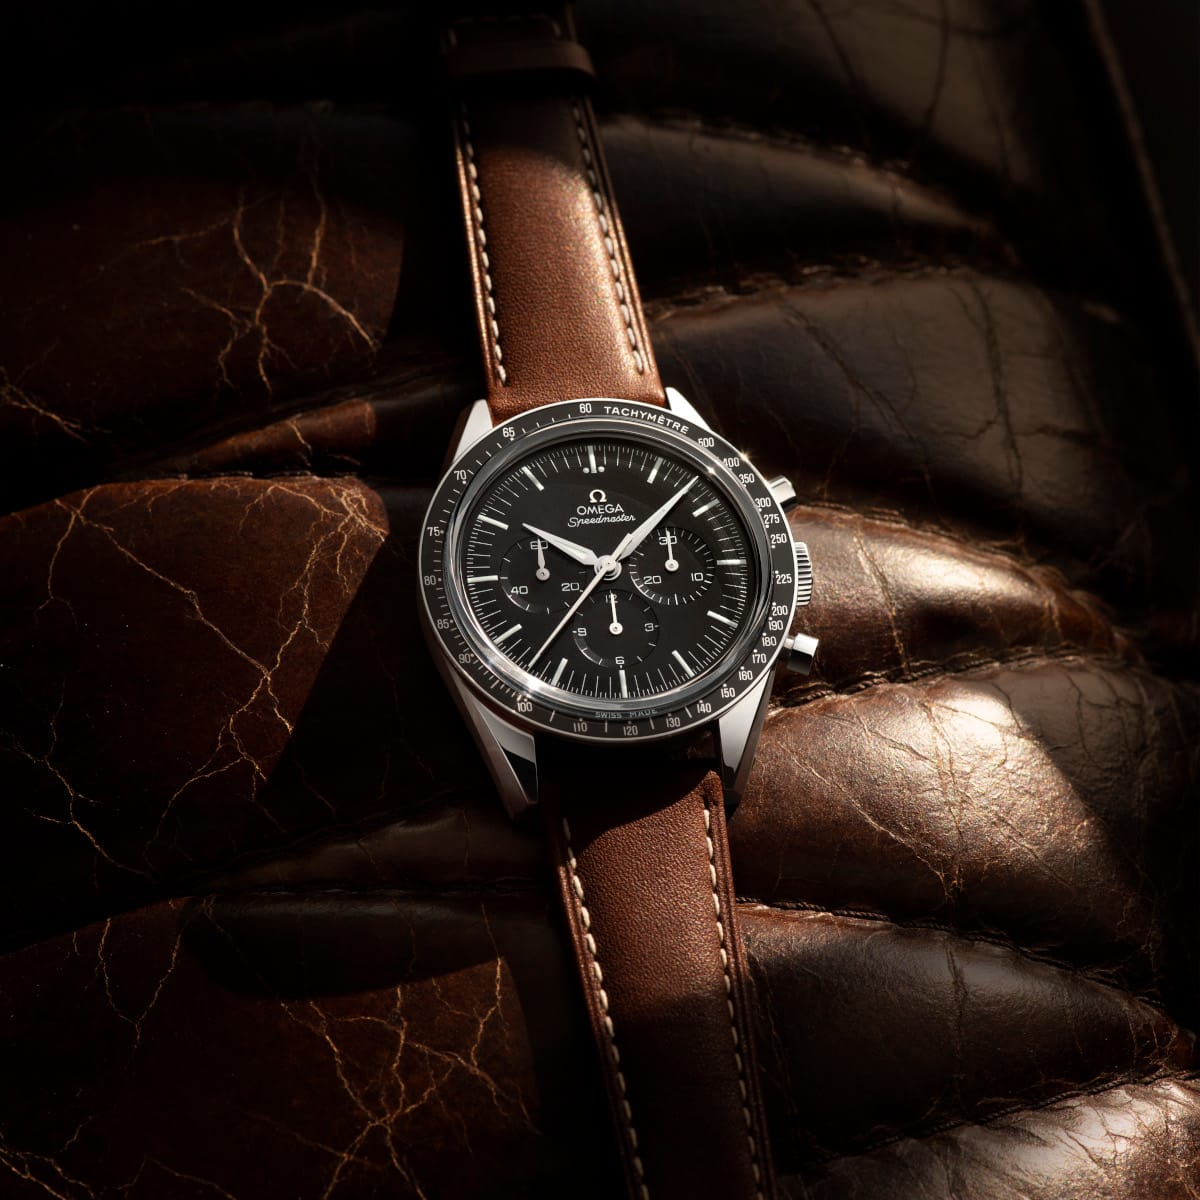 Omega Speedmaster First Omega in Space